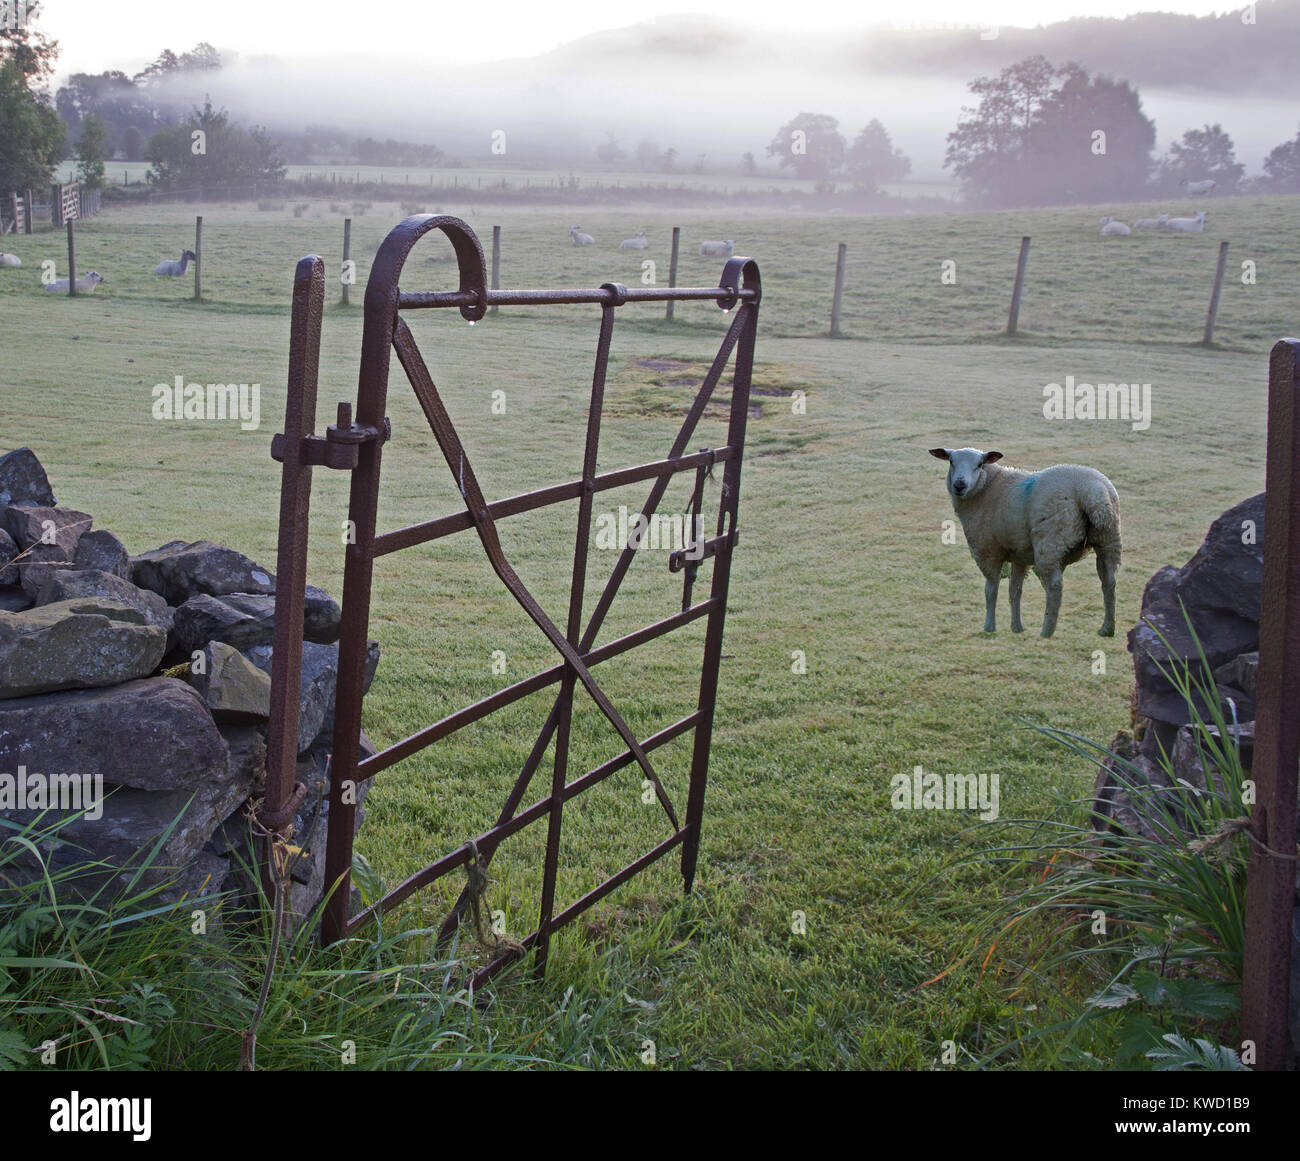 Misty morning on Hawkshead Hall Farm with open five barred metal gate and sheep in heavy dew near Hawkshead Cumbria English Lake District England Stock Photo